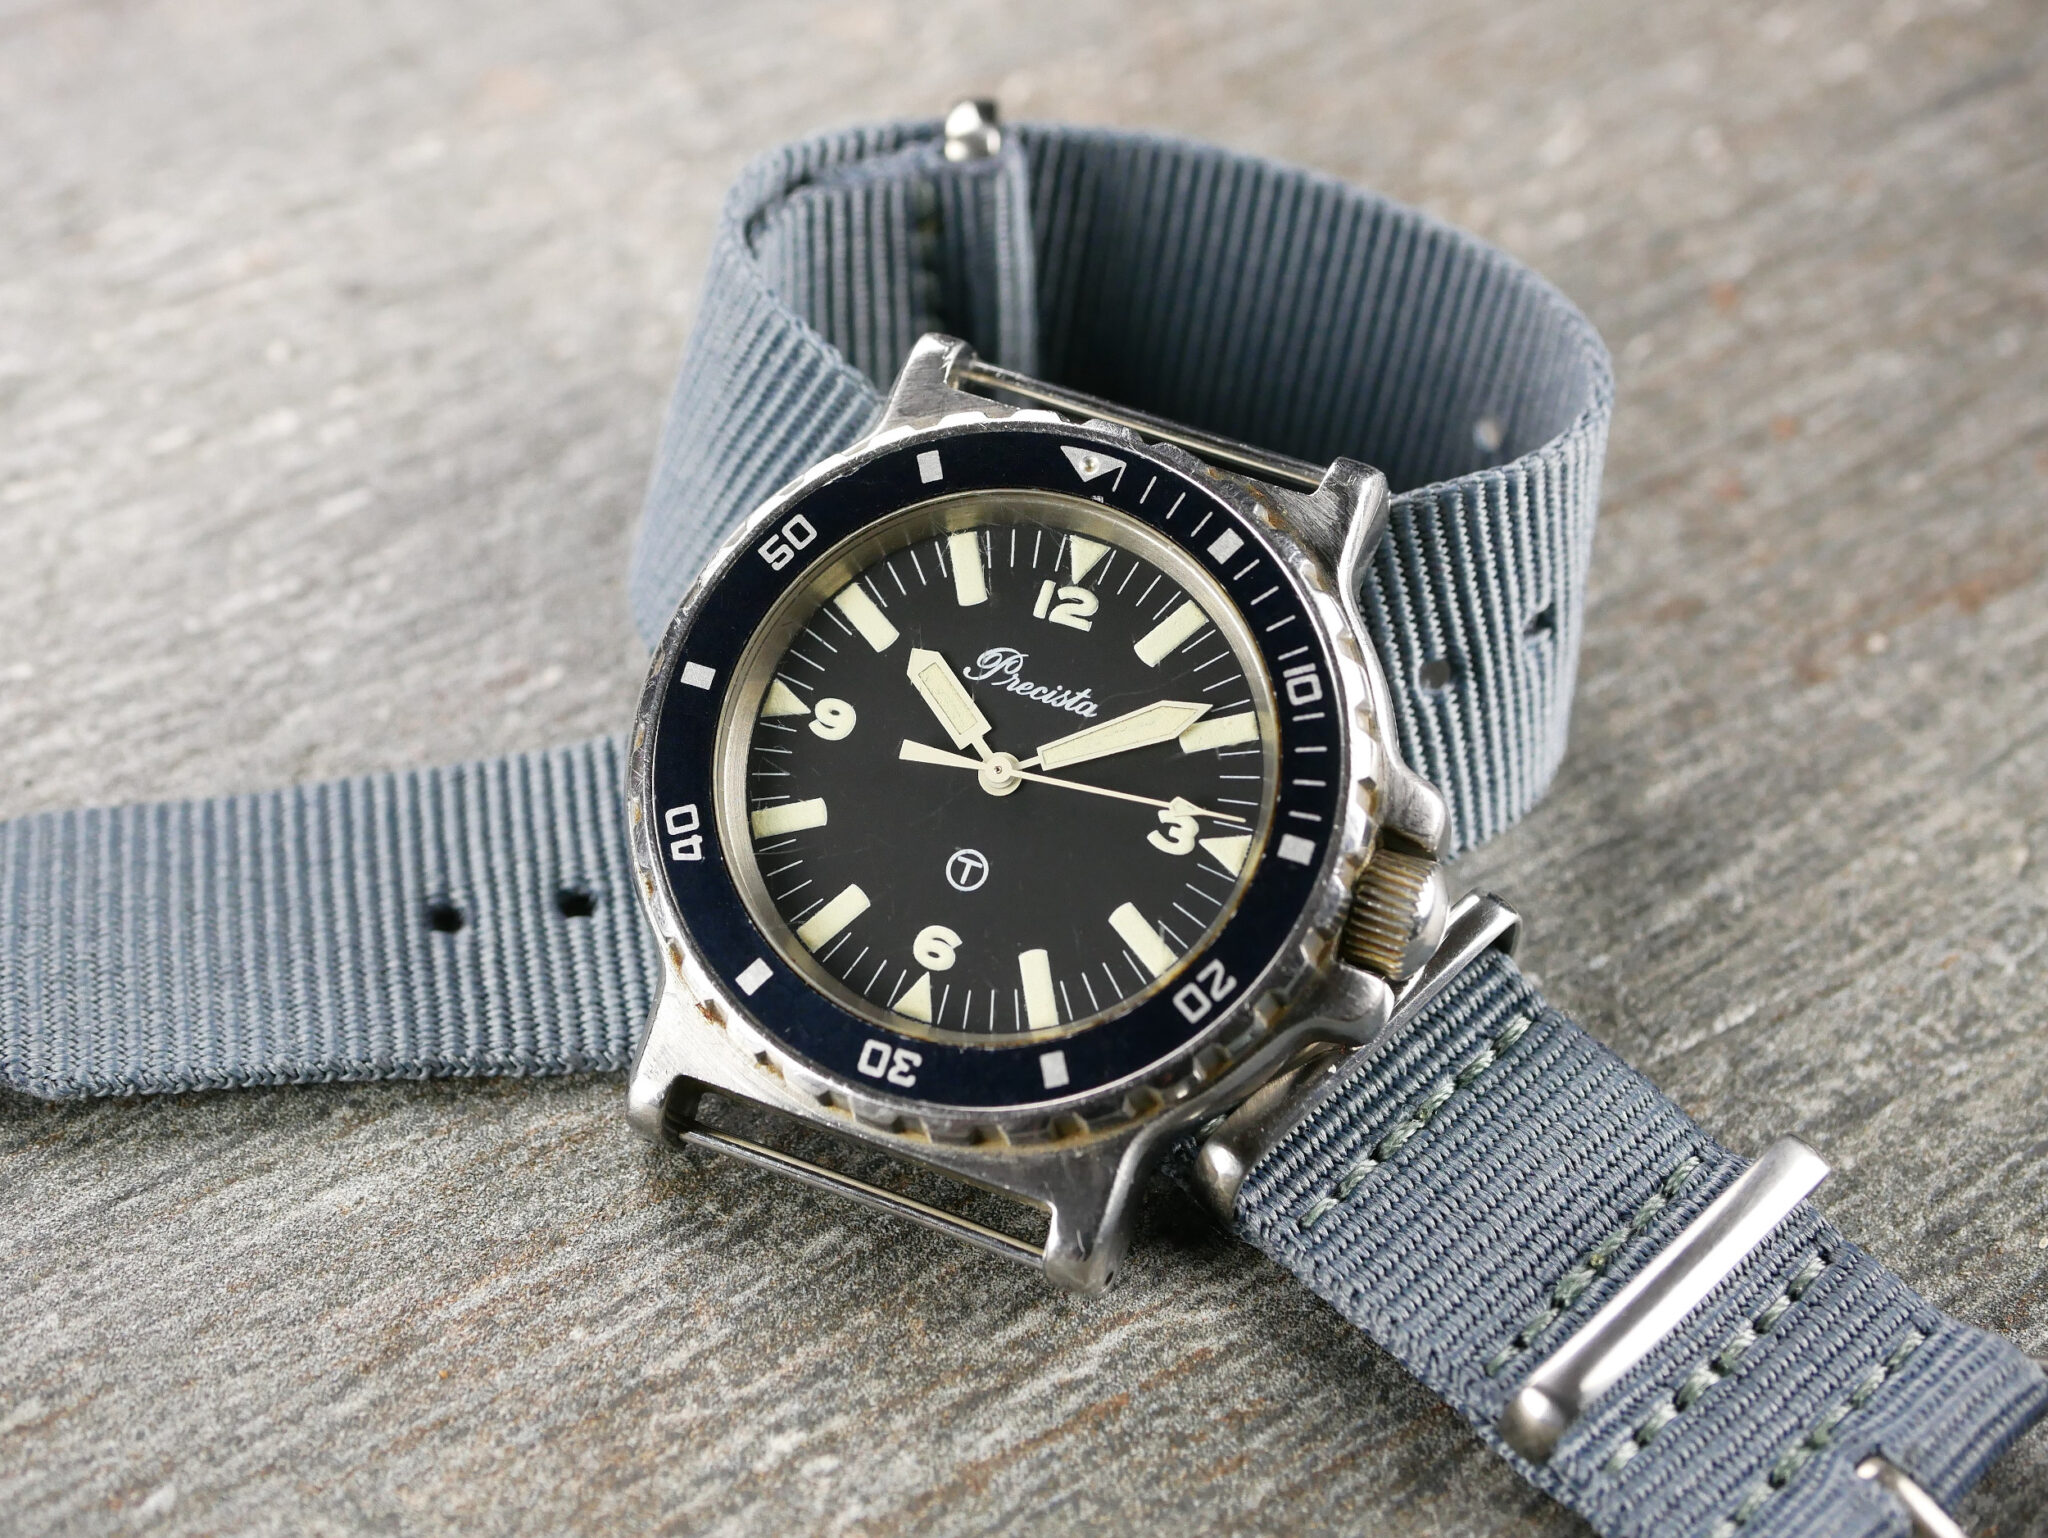 Precista Royal Navy Diver Watch c1989 Sold | Finest Hour